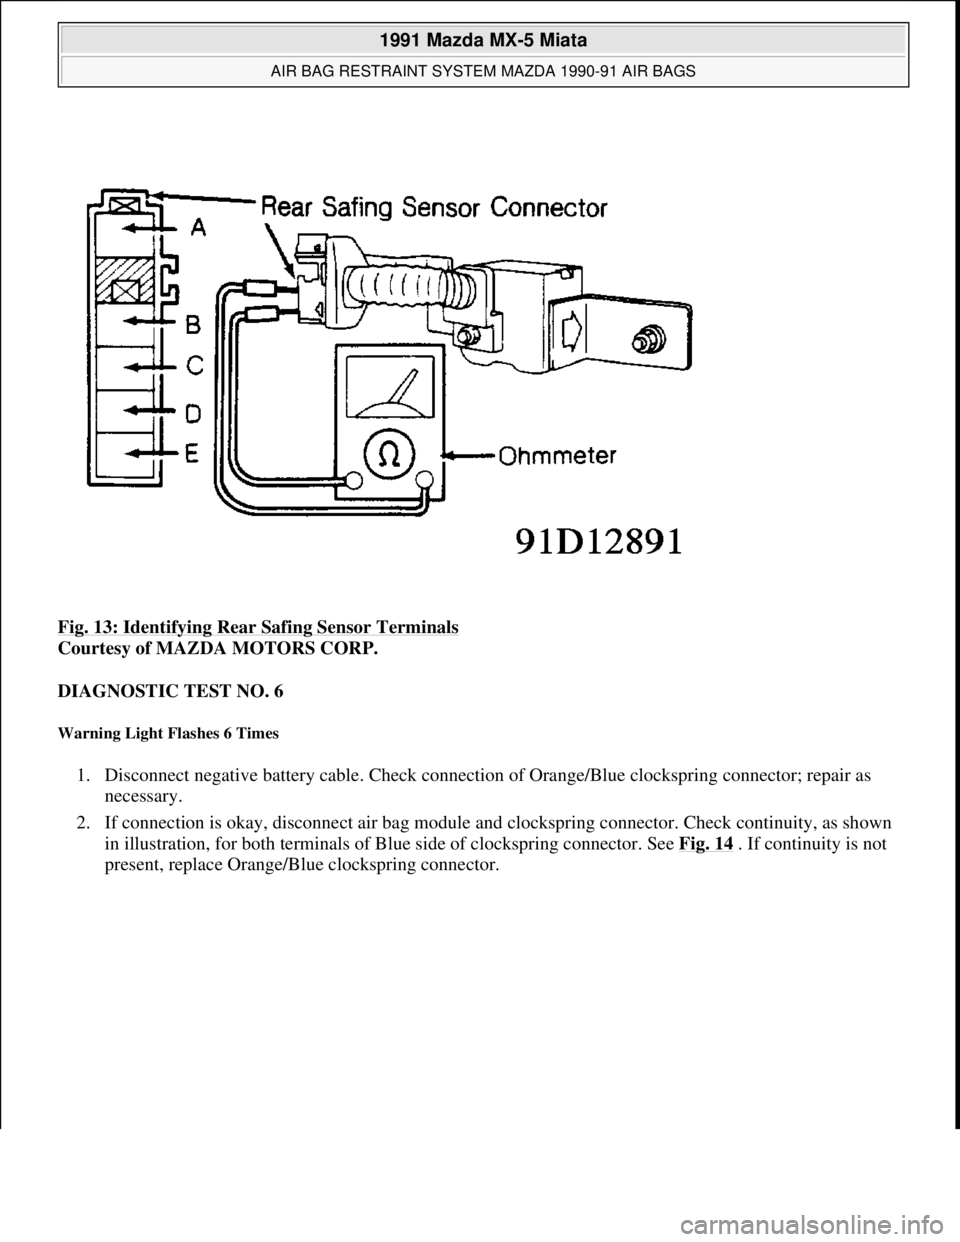 MAZDA MIATA 1991  Factory Service Manual Fig. 13: Identifying Rear Safing Sensor Terminals 
Courtesy of MAZDA MOTORS CORP. 
DIAGNOSTIC TEST NO. 6 
Warning Light Flashes 6 Times 
1. Disconnect negative battery cable. Check connection of Orang